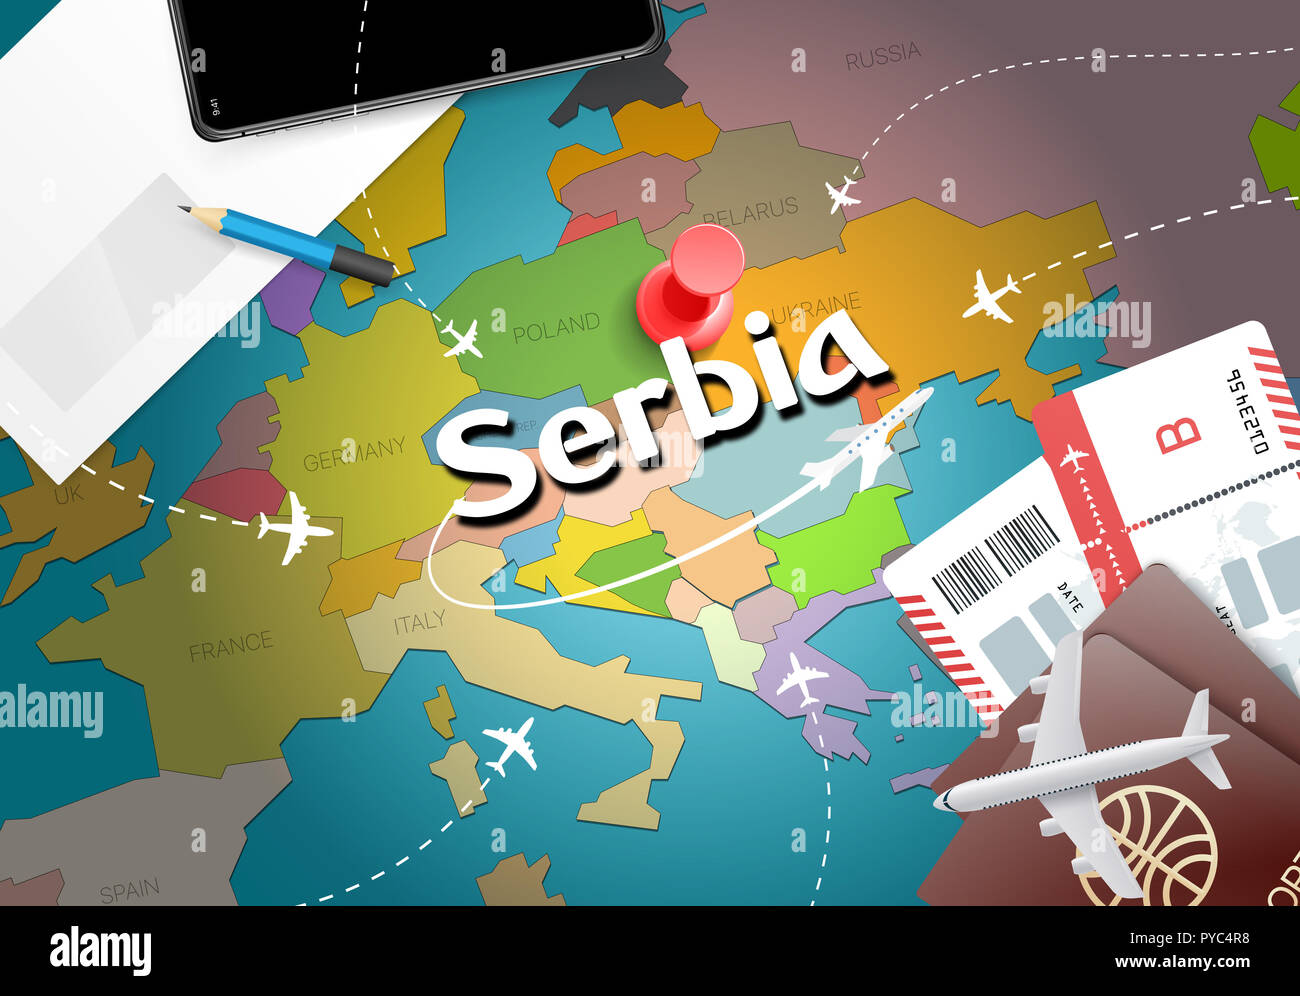 Serbia travel concept map background with planes,tickets. Visit Serbia travel and tourism destination concept. Serbia flag on map. Planes and flights  Stock Photo